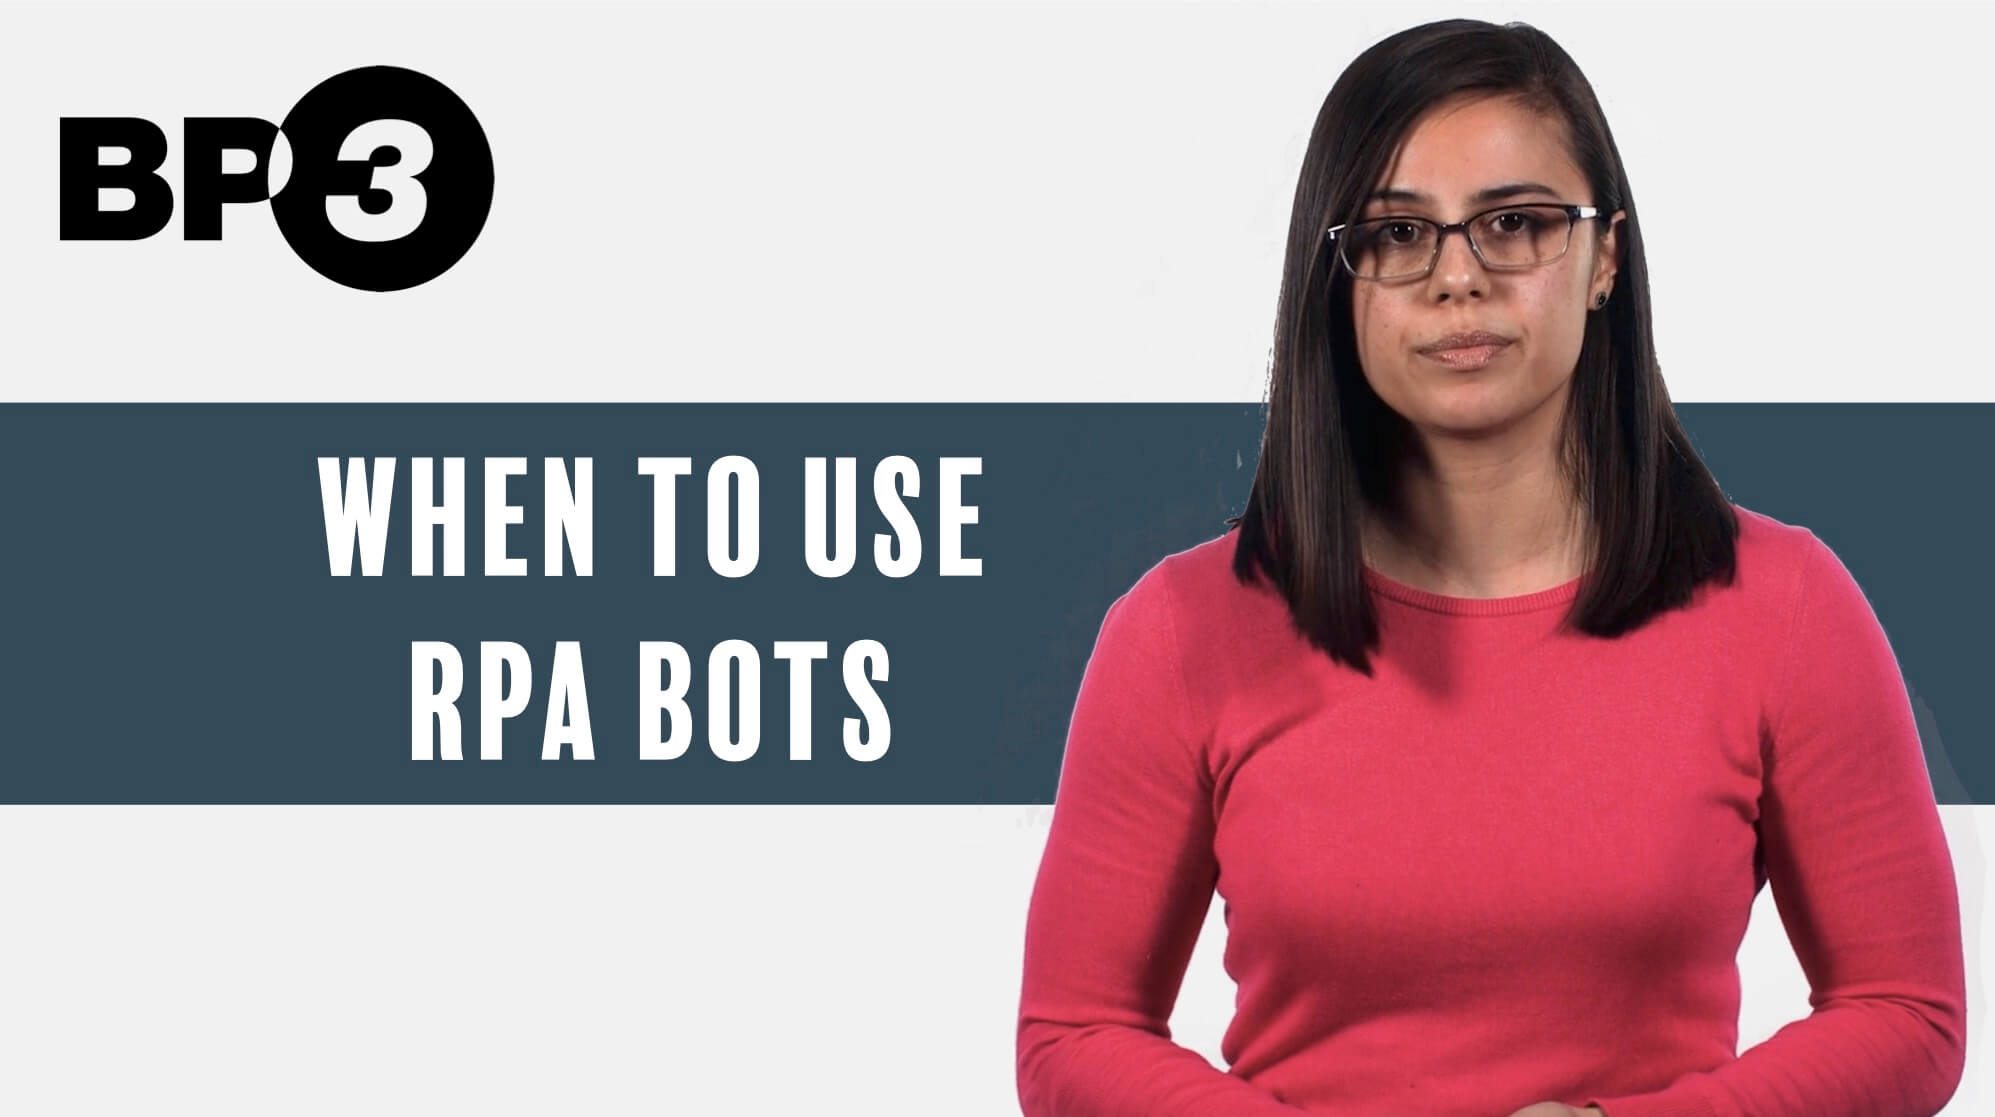 When do you use RPA bots?